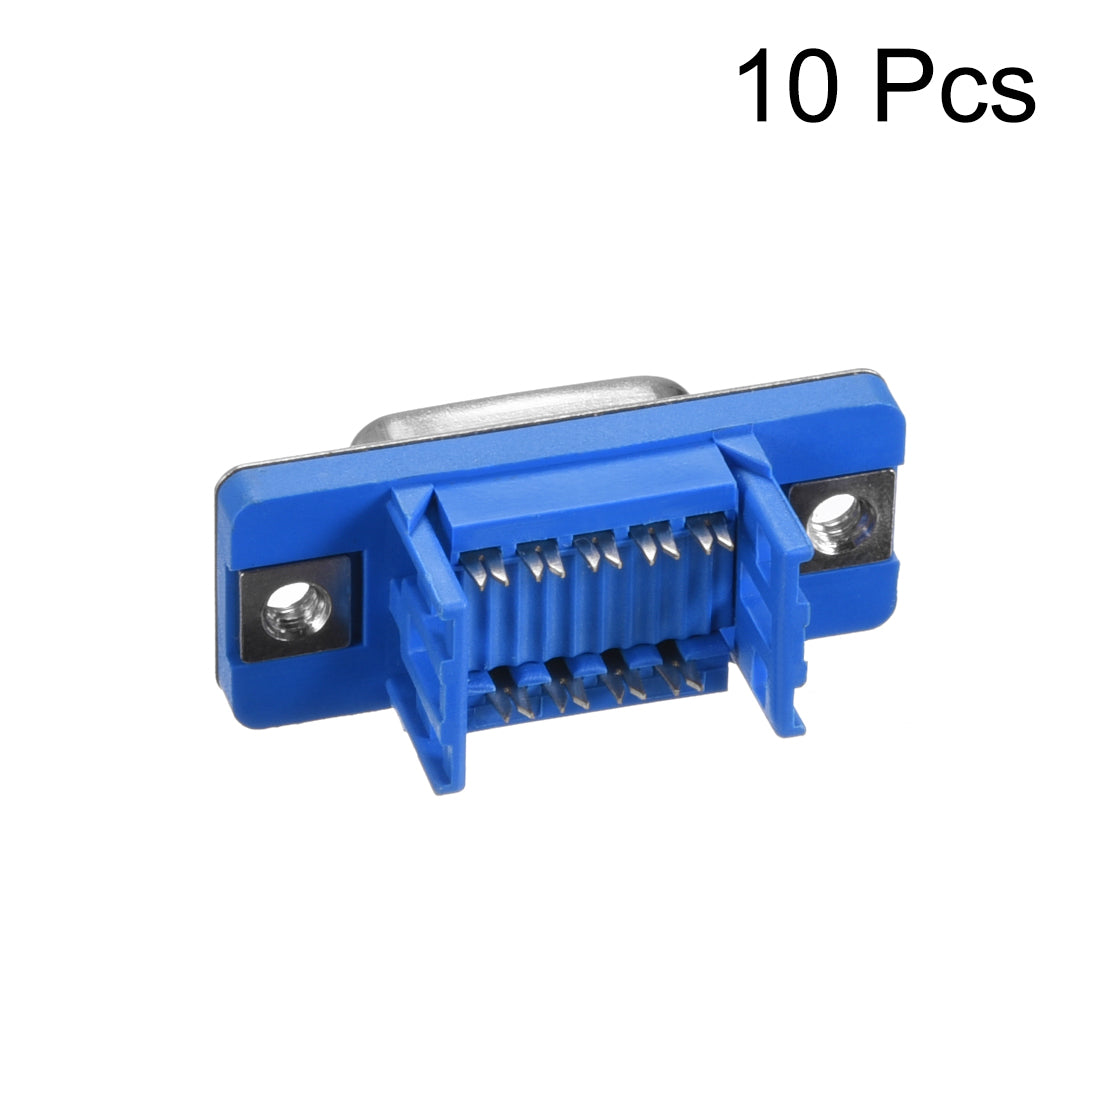 uxcell Uxcell IDC D-Sub Ribbon Cable Connector 9-pin 2-row Female Socket IDC Crimp Port Terminal Breakout for Flat Ribbon Cable Blue 10pcs